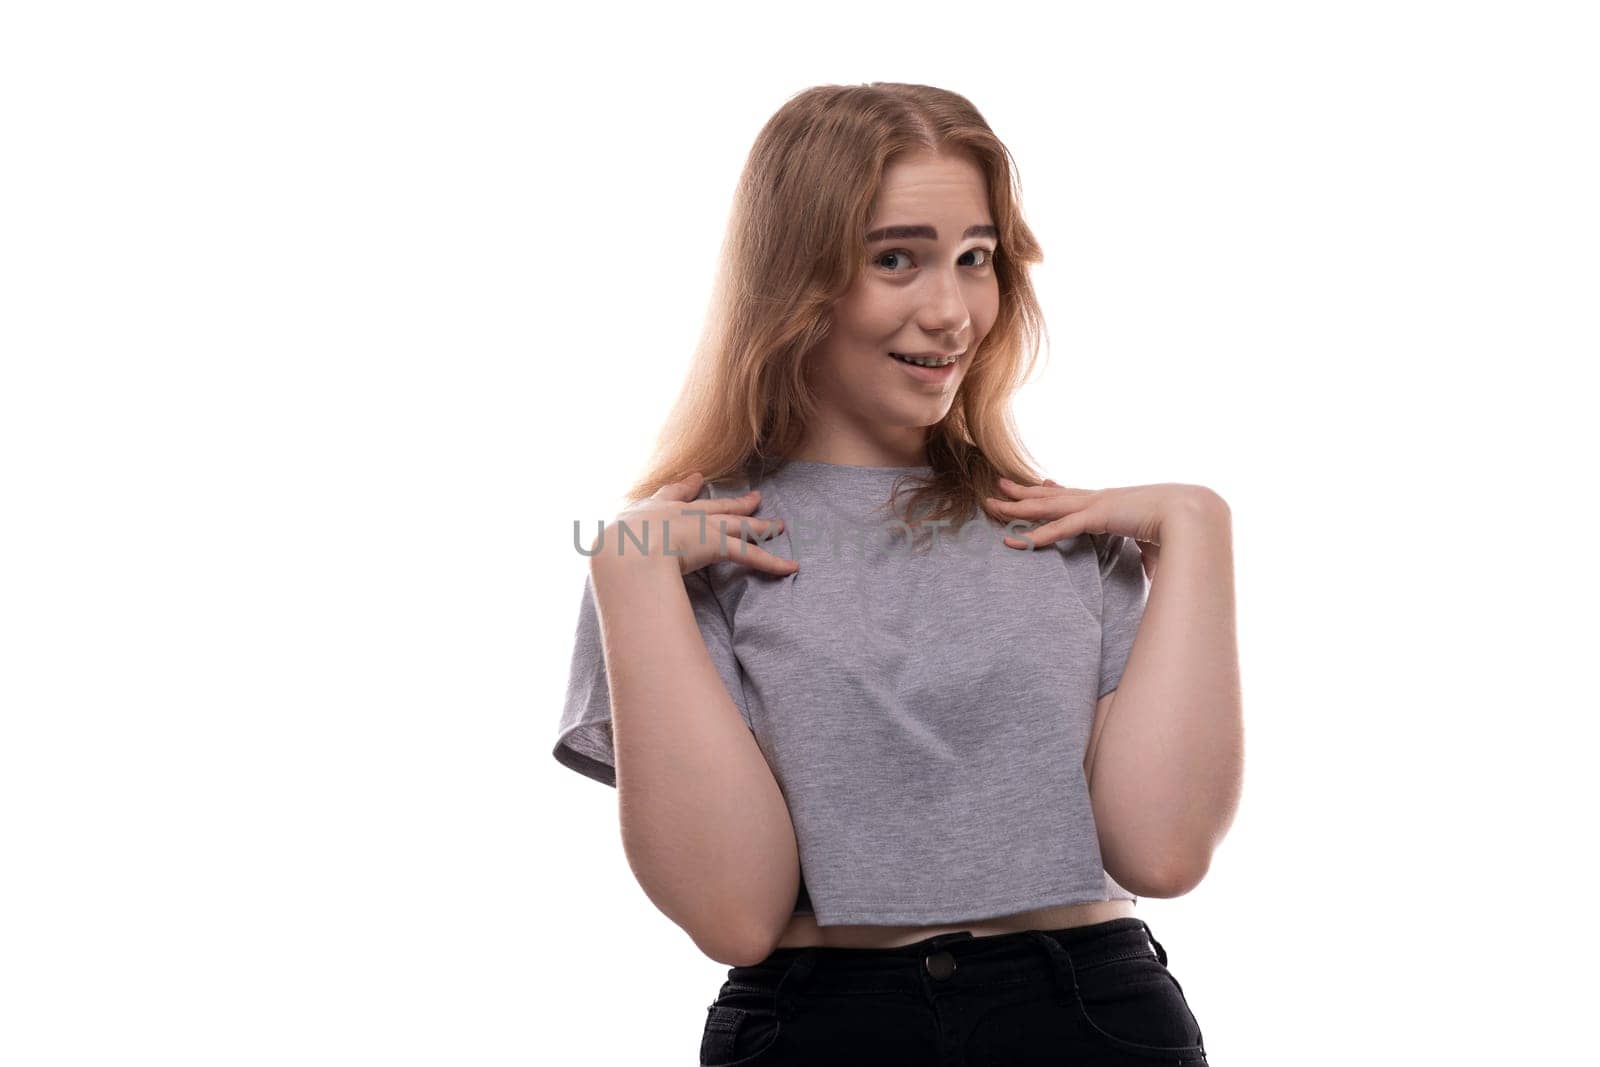 Confused fair-haired teenage girl in a gray T-shirt on a white background.